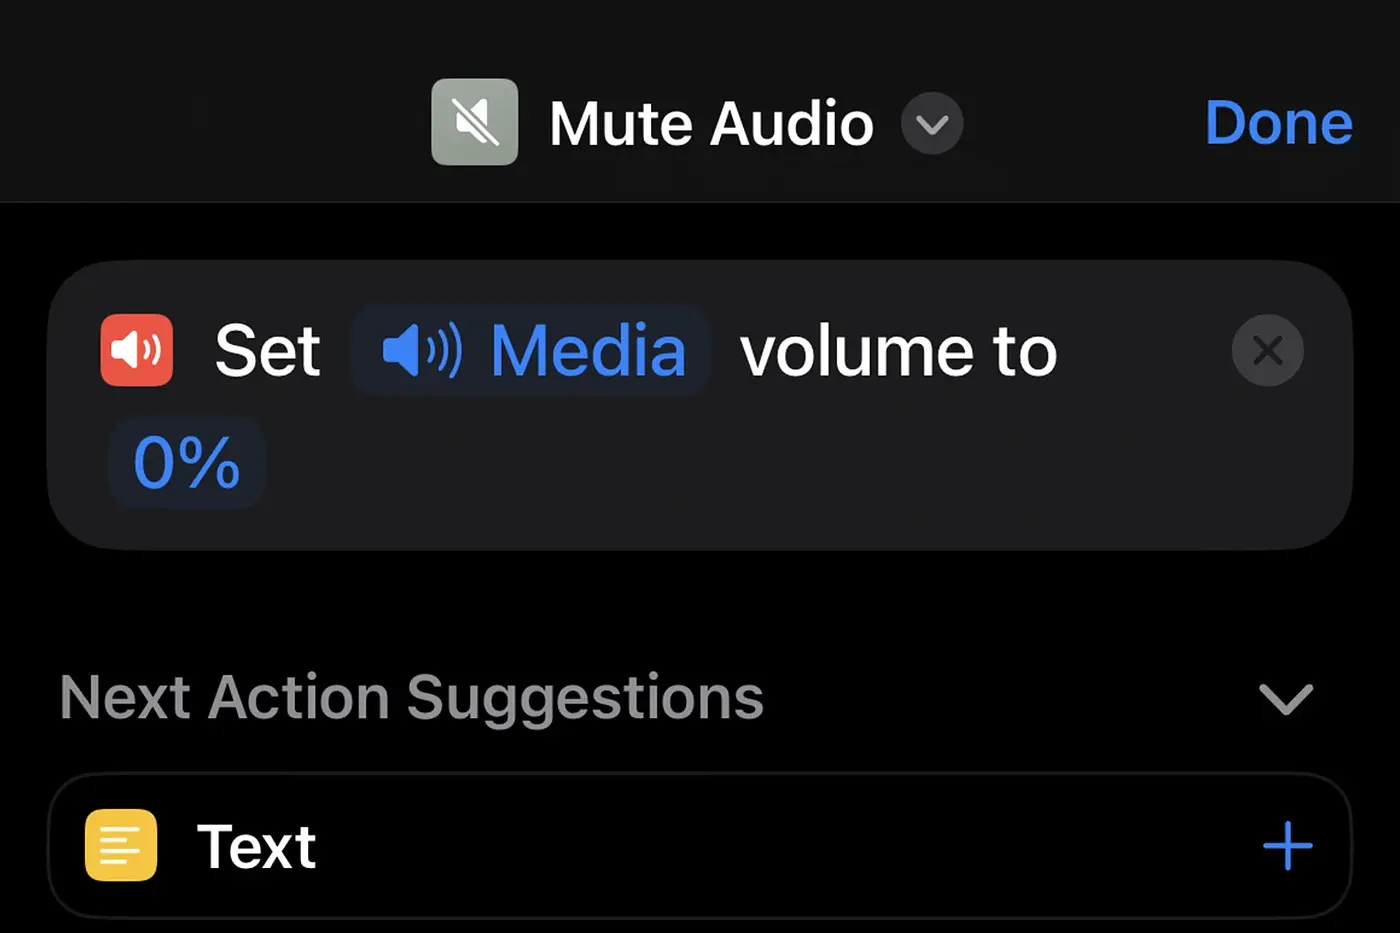 A screenshot of an Apple Shortcut showing the media volume being set to 0%.